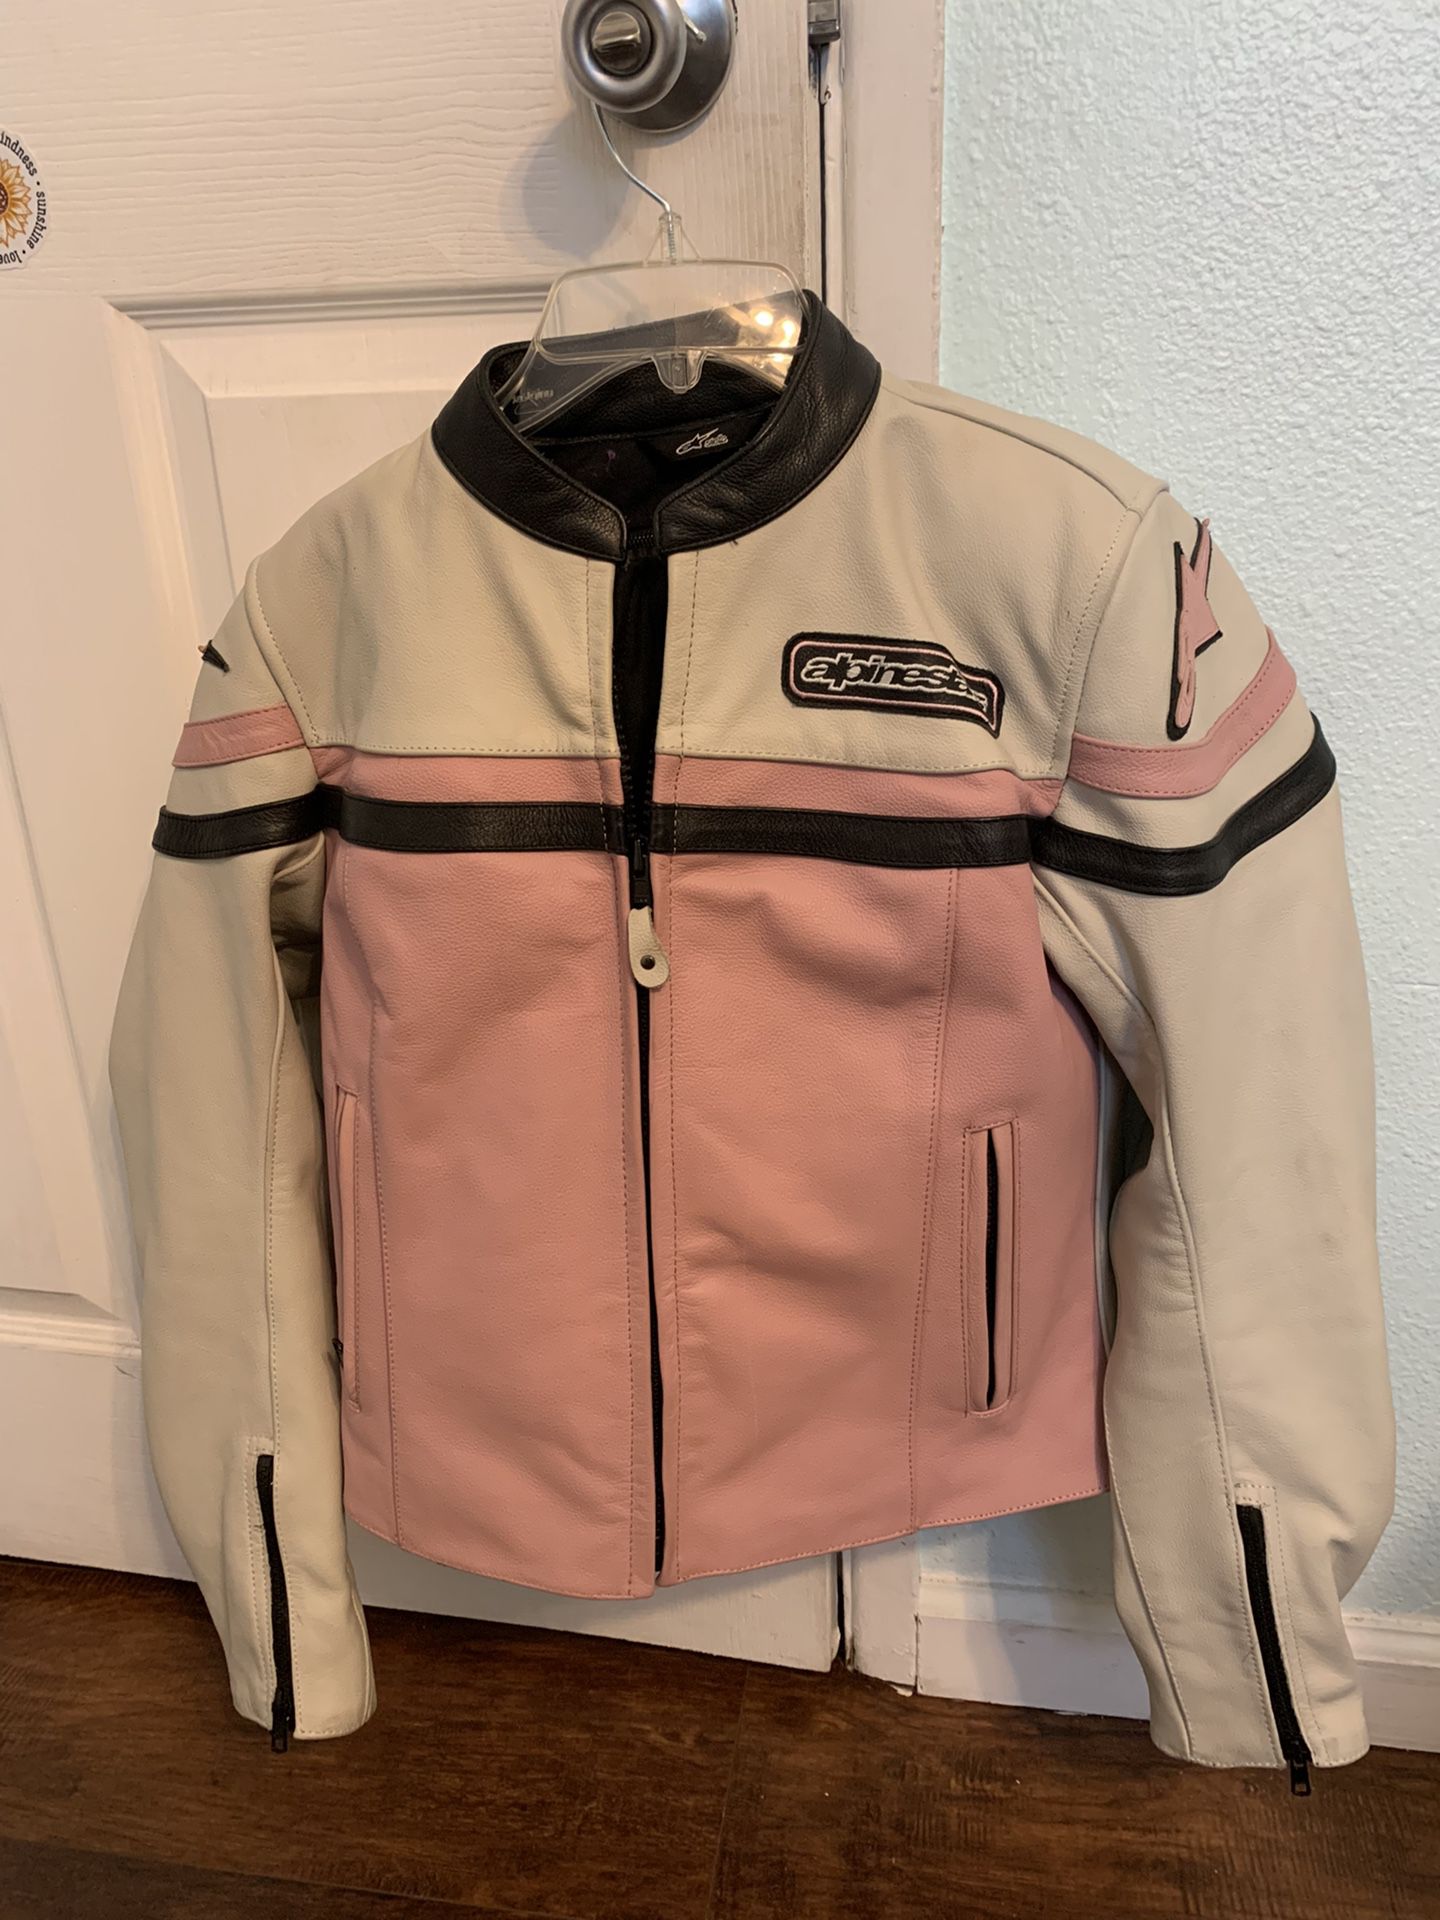 Alpinestars Stella Womens Pink/White/Black Leather Motorcycle Jacket. Size 6. Padding on shoulders and elbows. Gently used condition, no flaws, no rip